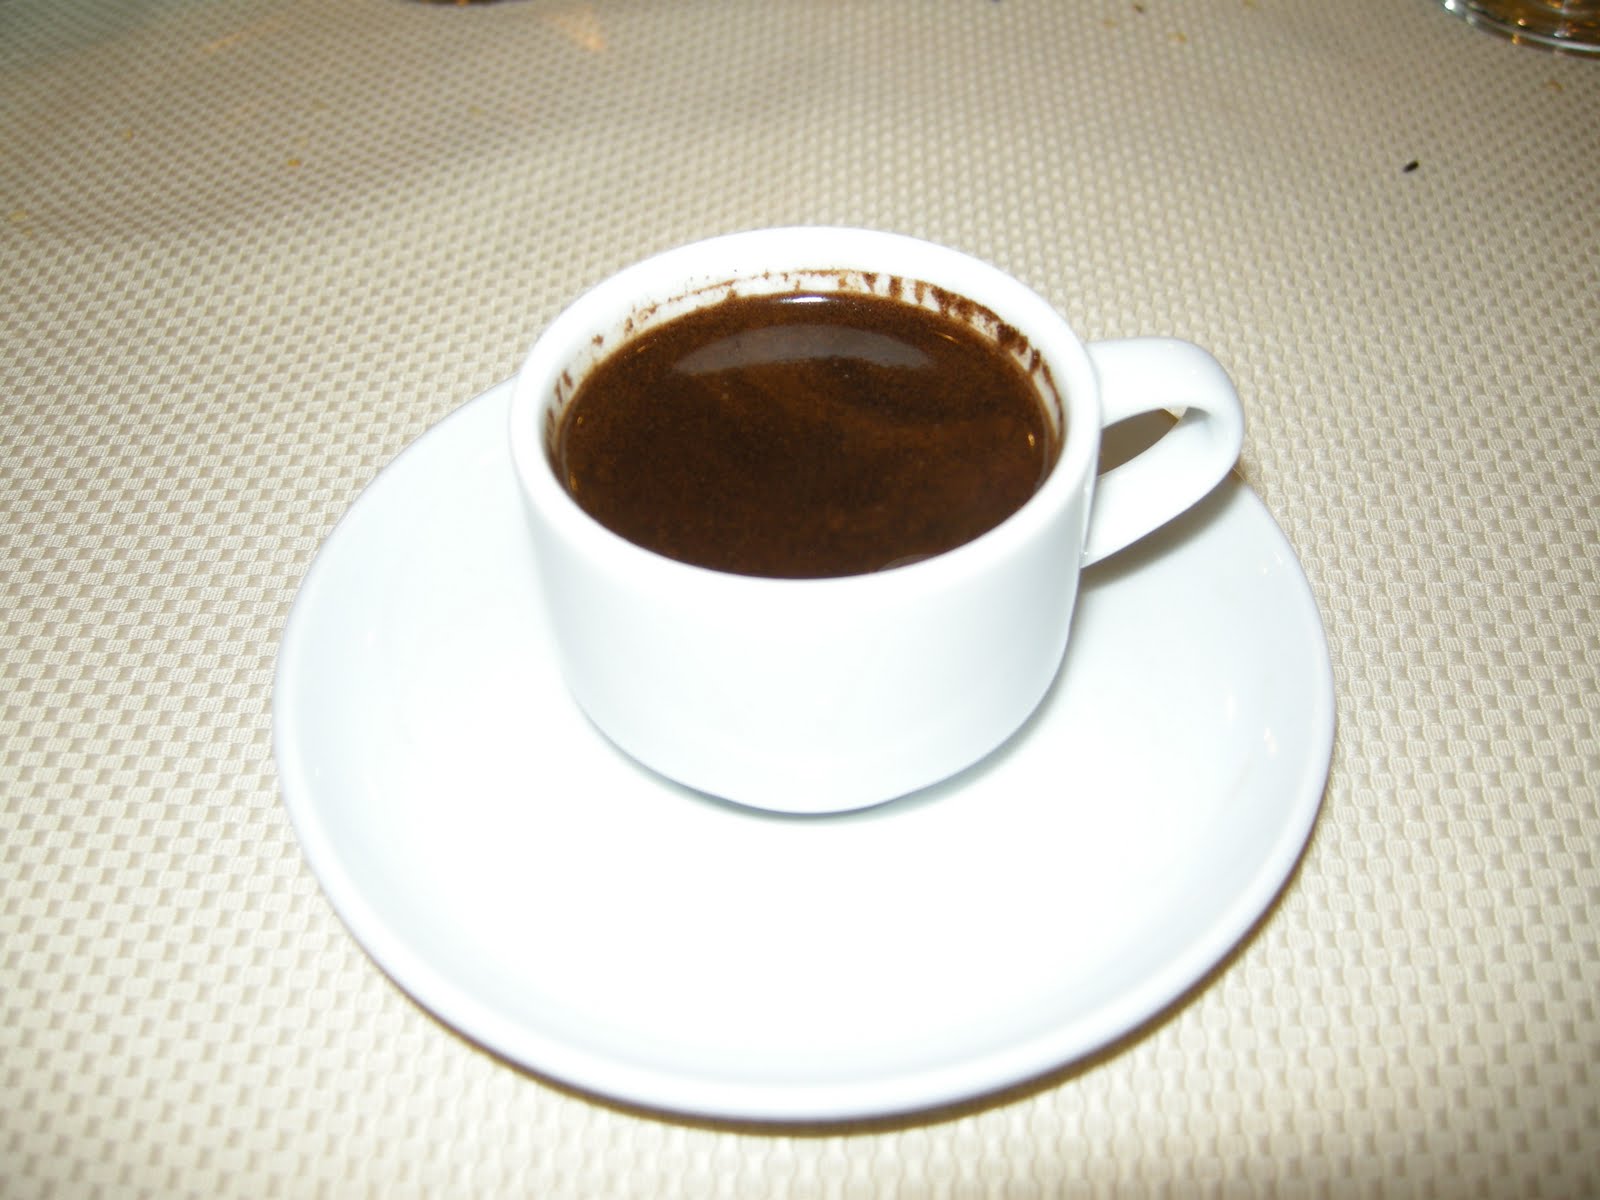 All about Life: HOW TO MAKE TURKISH COFFEE READINGS